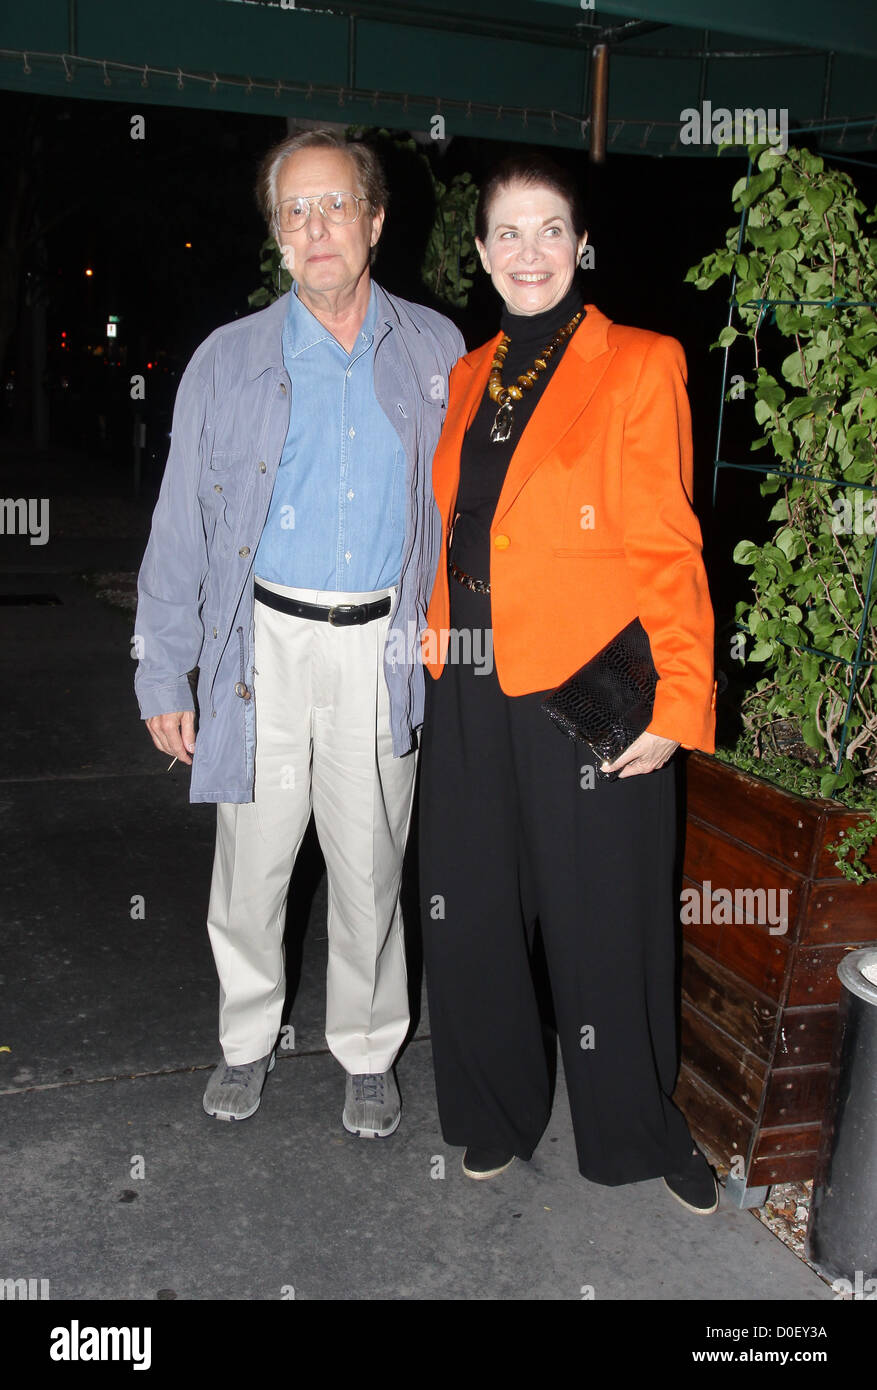 William Friedkin outside Madeos restaurant with his wife Los Angeles, California - 11.09.10 Stock Photo